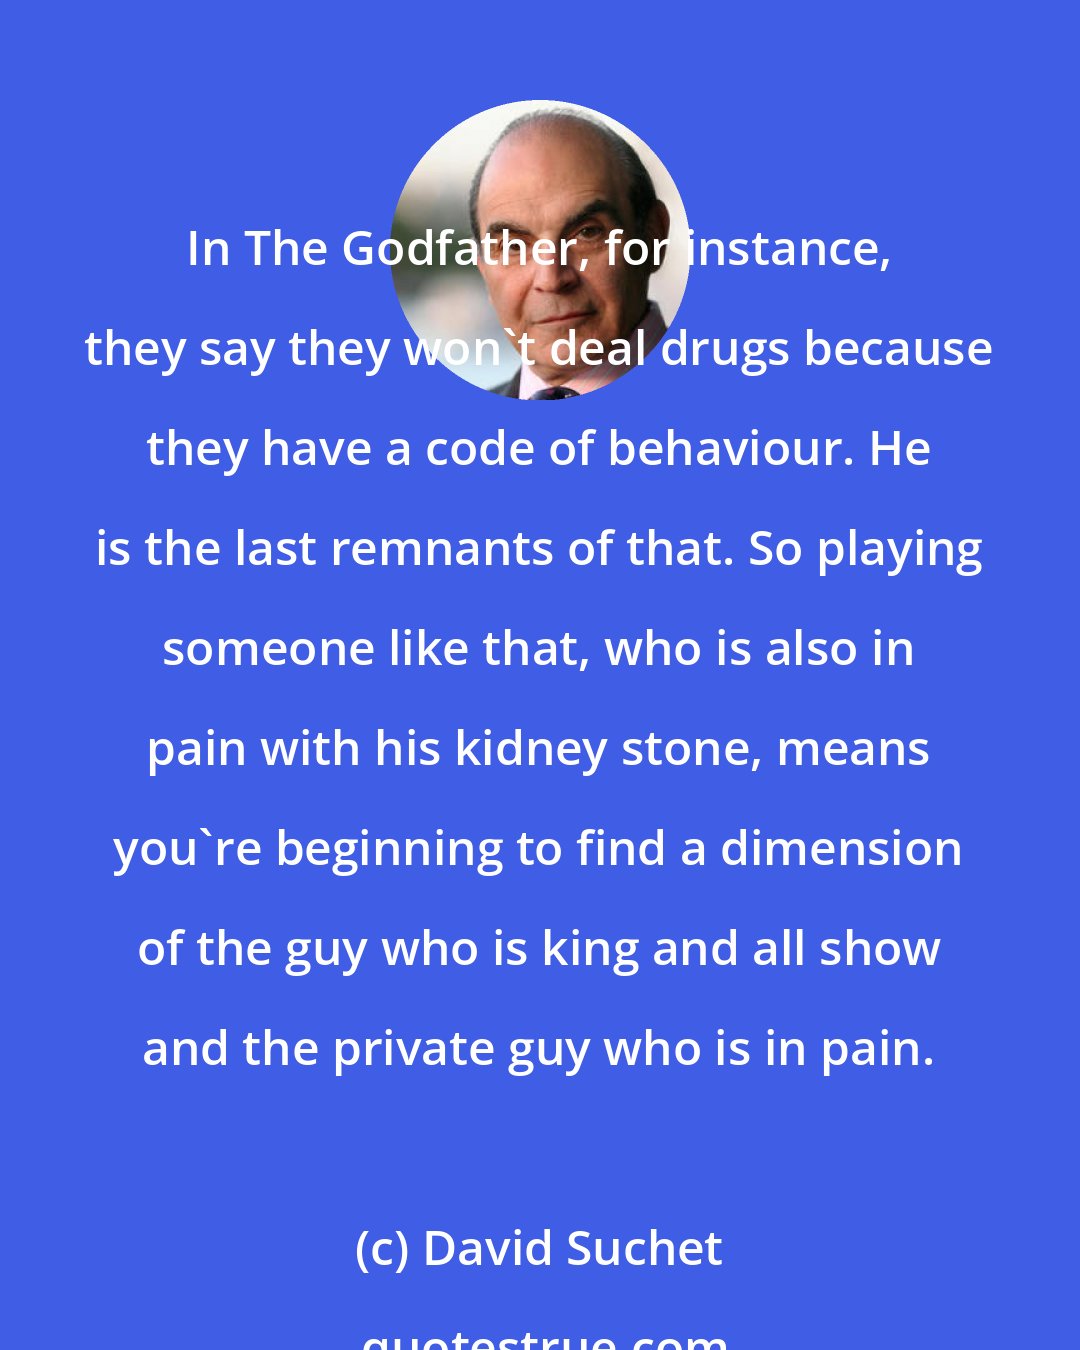 David Suchet: In The Godfather, for instance, they say they won't deal drugs because they have a code of behaviour. He is the last remnants of that. So playing someone like that, who is also in pain with his kidney stone, means you're beginning to find a dimension of the guy who is king and all show and the private guy who is in pain.